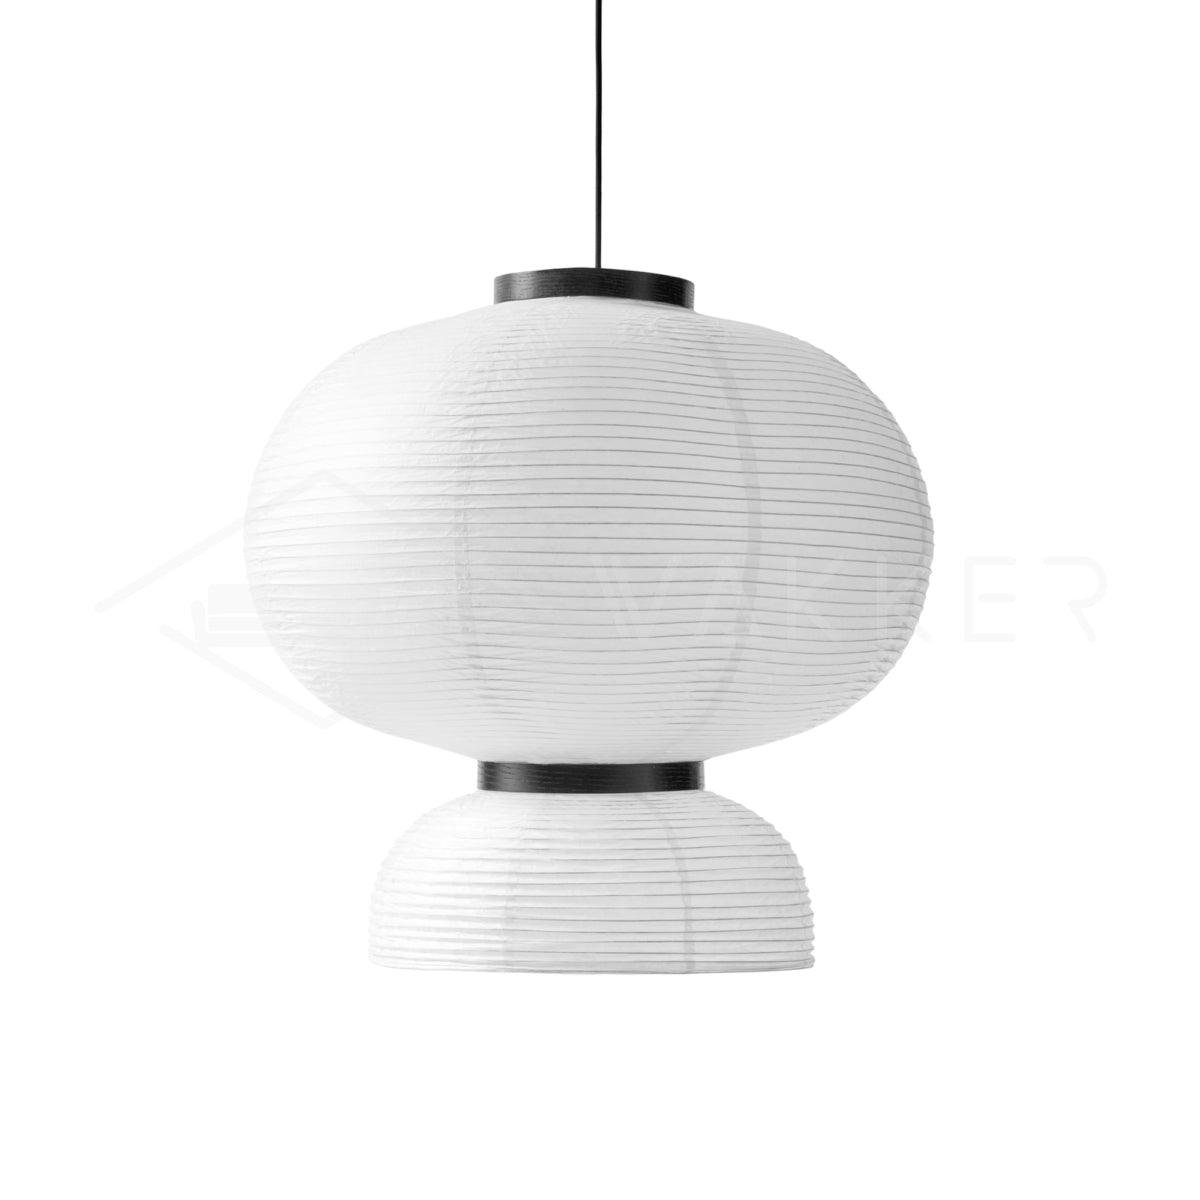 JH6 Pendant Lamp: White Rice Paper Lantern with 19.7" Diameter and 16.5" Height (or 50cm x 42cm)